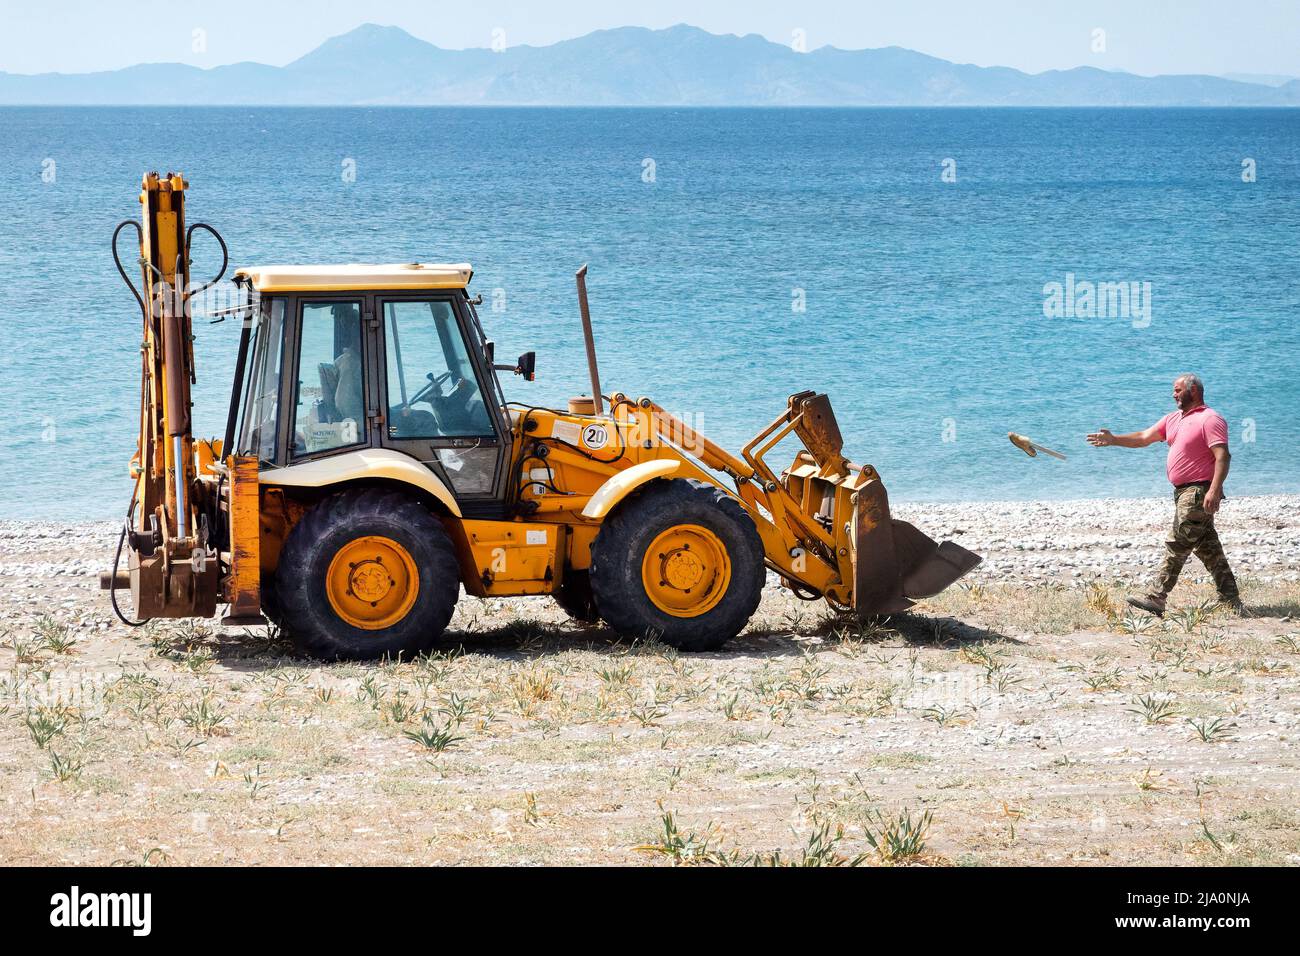 A workman throws litter into a JCB diggers skip whilst clearing and cleaning up discarded rubbish on a beach near Rhodes City, Rhodes Greece. Stock Photo